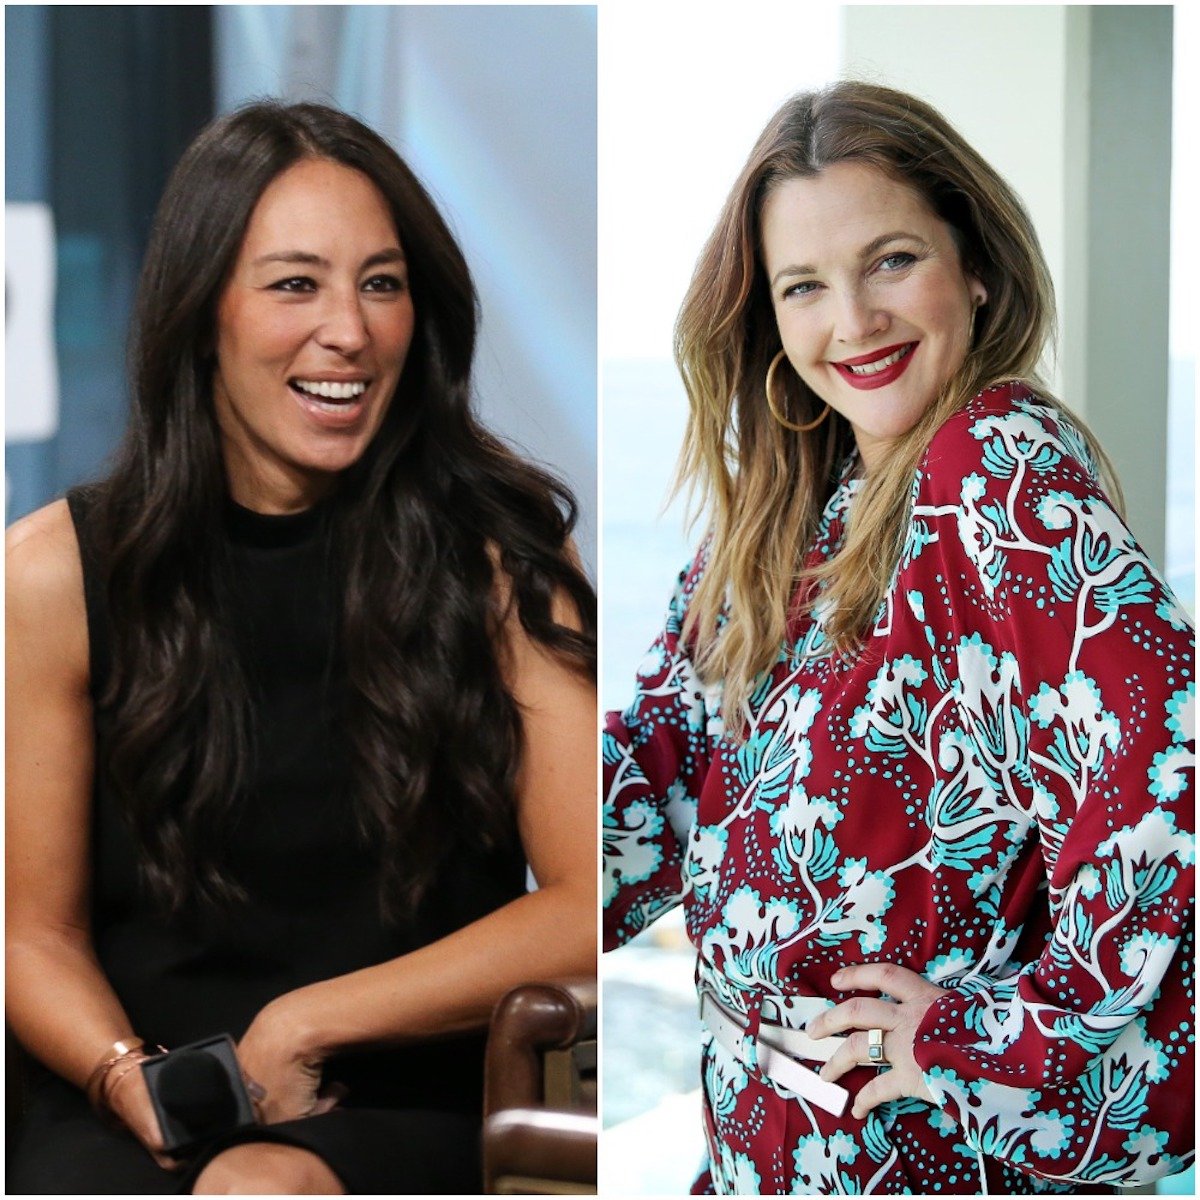 Joanna Gaines and Drew Barrymore Share the Same Celebrity Crush